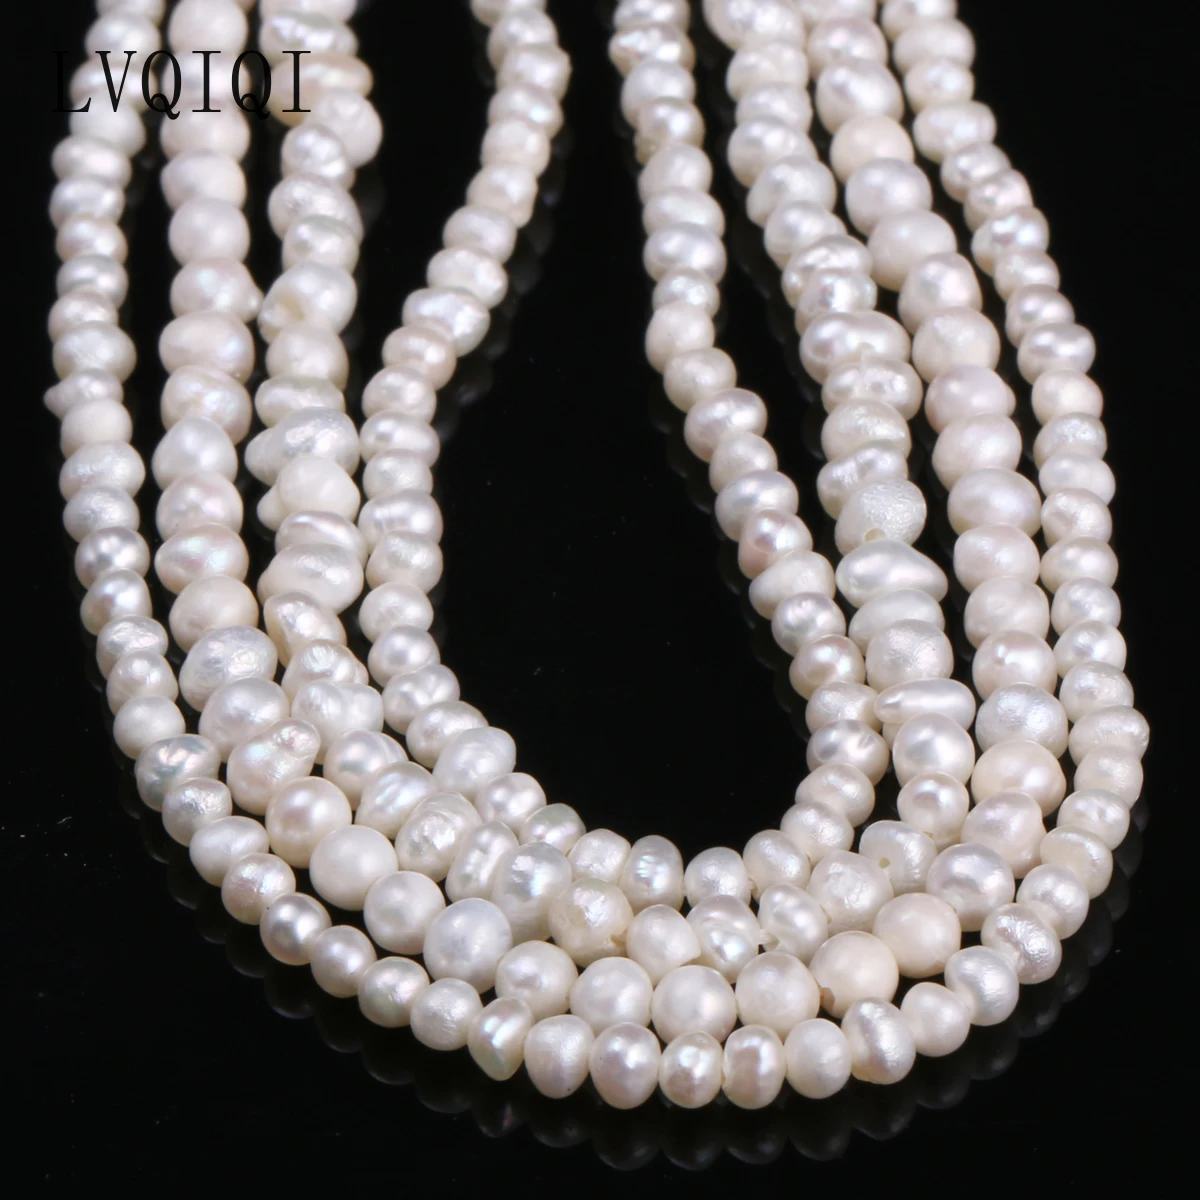 

LVQIQI Natural Freshwater Cultured Pearls Beads Round 100% Exquisite Pearls For Jewelry Making Necklace Bracelet 13 Inches 3-4mm